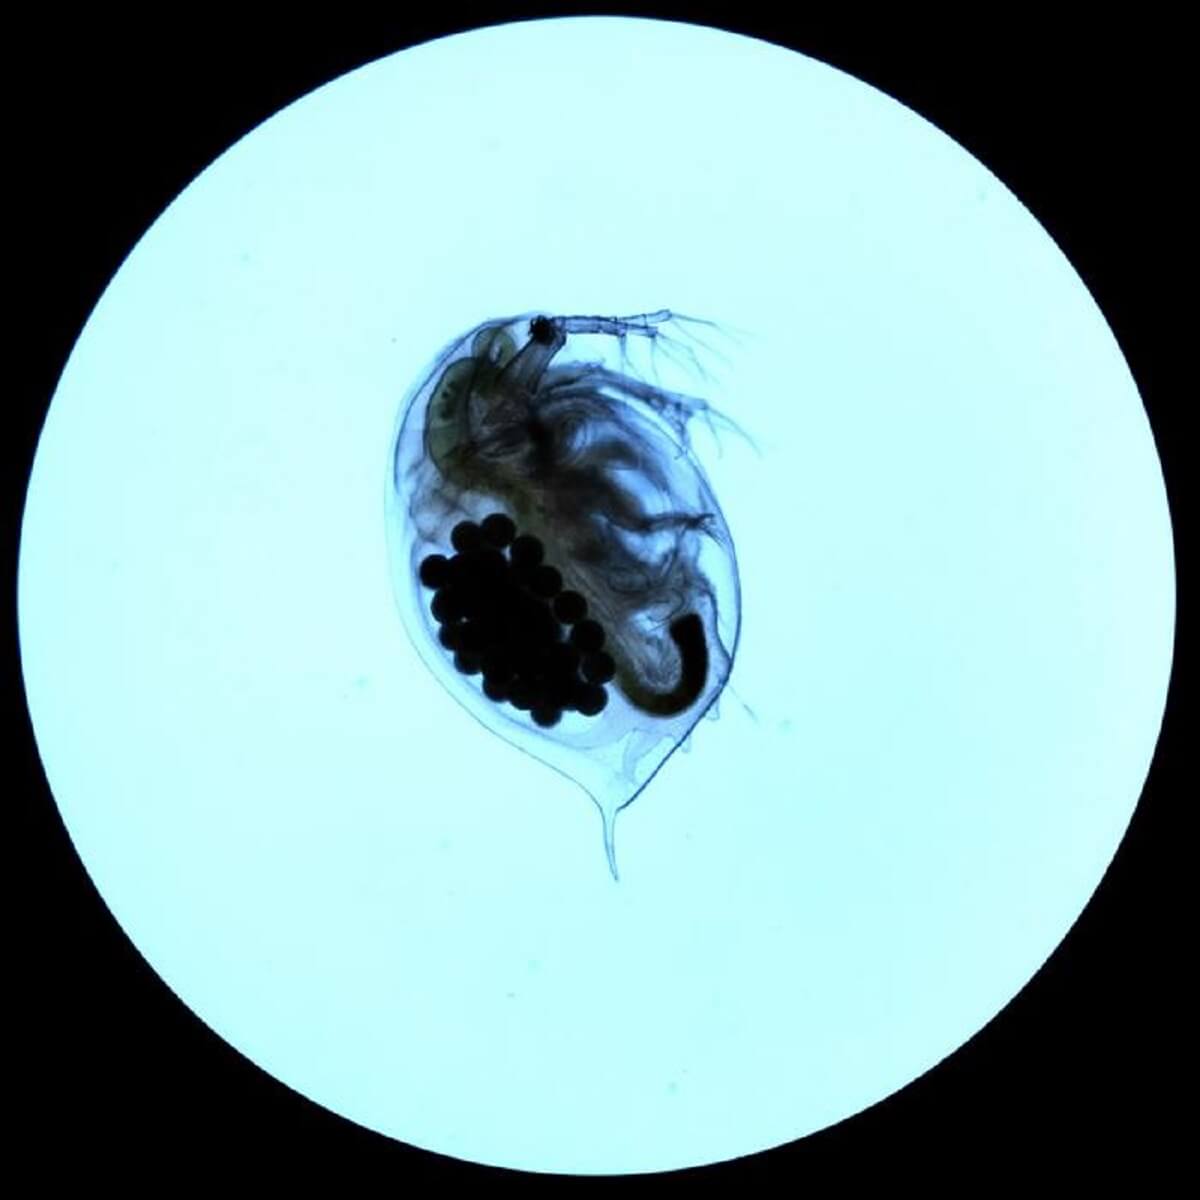 large light blue circle on a background. inside the blue circle is a black sea organism (the image from a microscope)